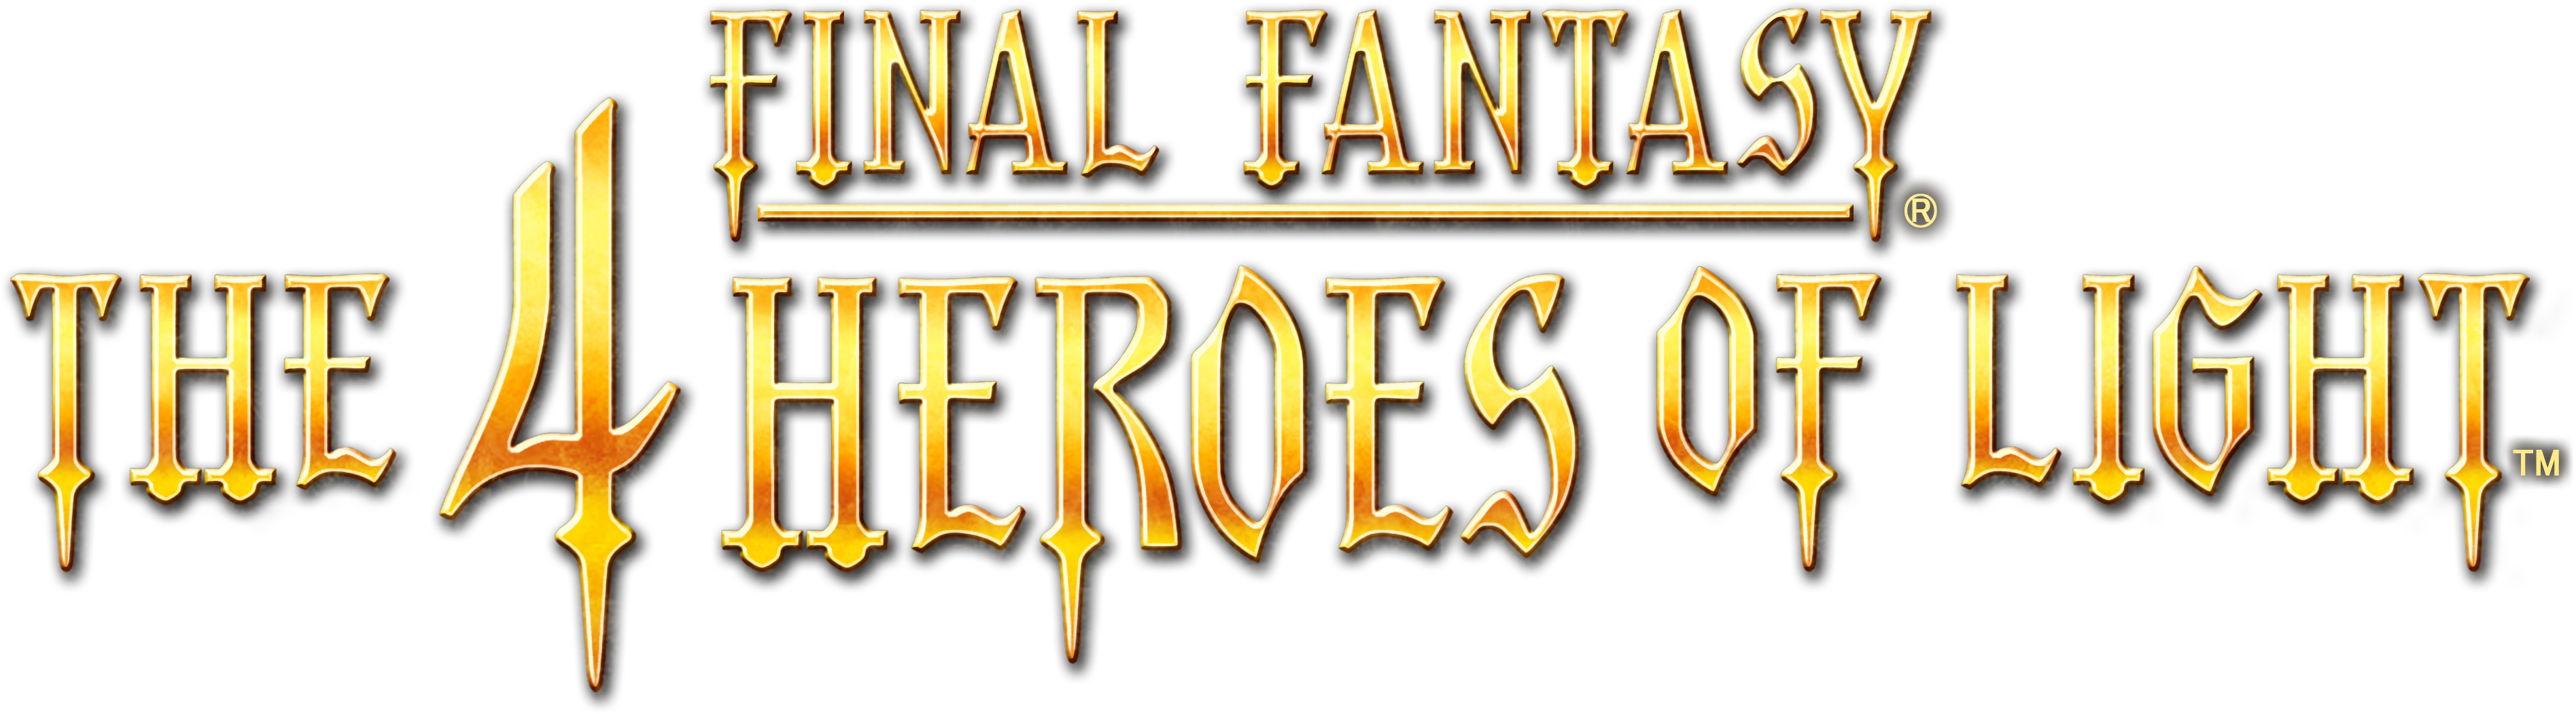 ON THIS DAY: Final Fantasy 4 Heroes of Light was released